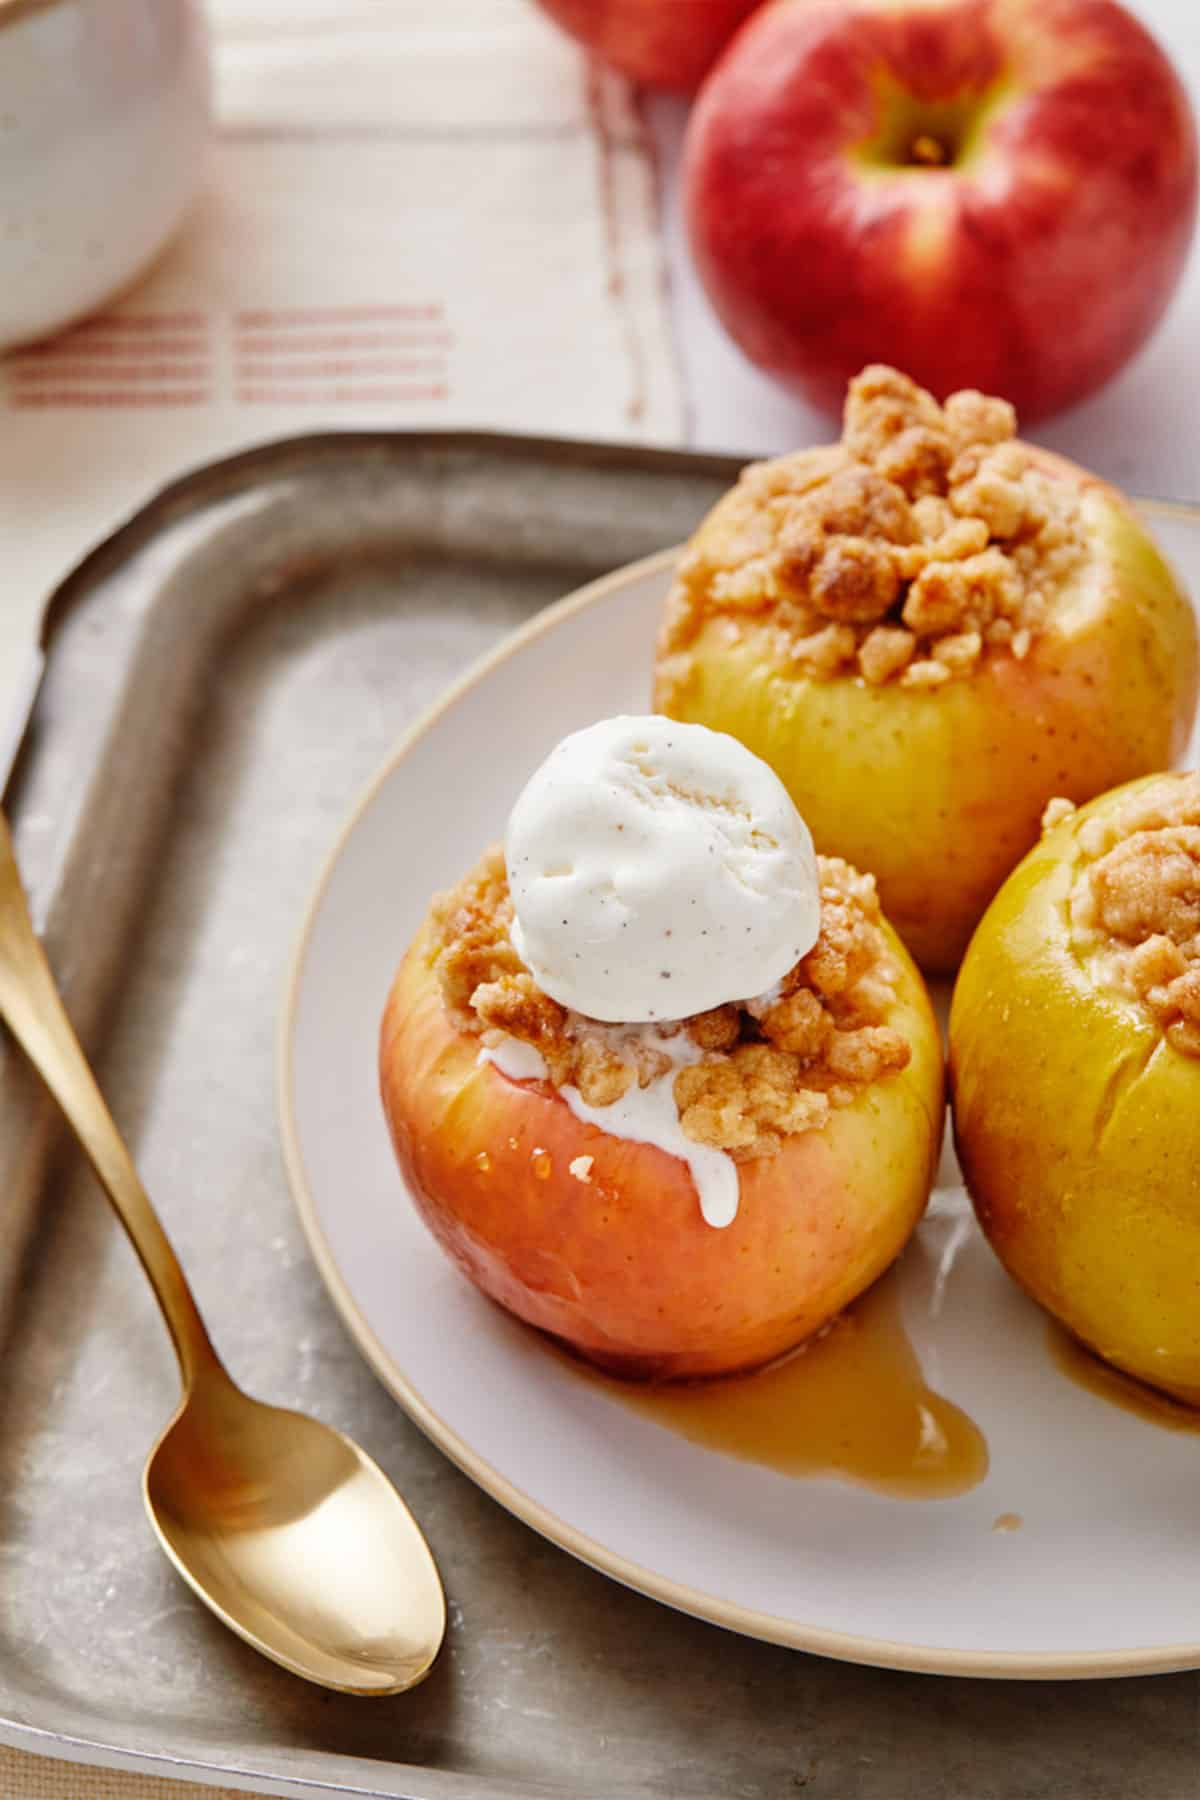 Baked apples with crumble topping on a plate and one topped with a scoop of ice cream.